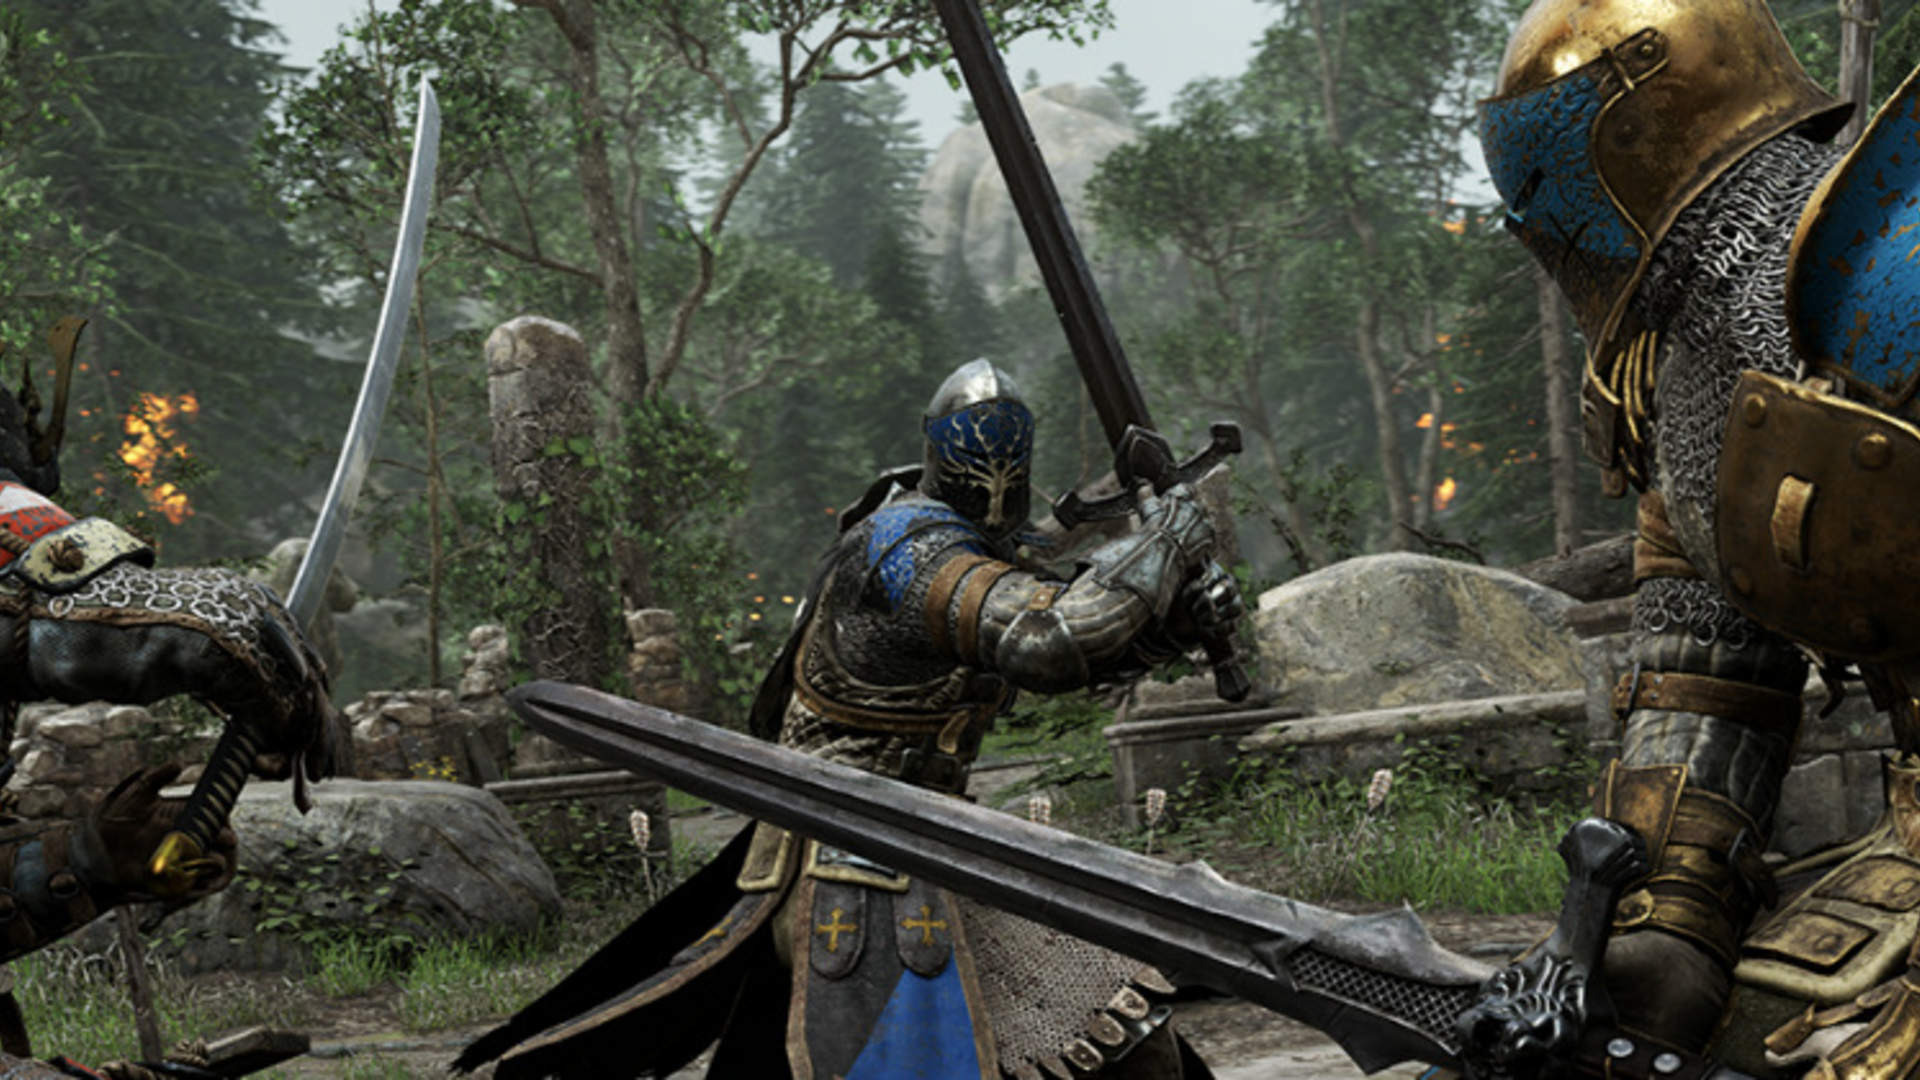 Medieval Games for PC - Learn About Them Here